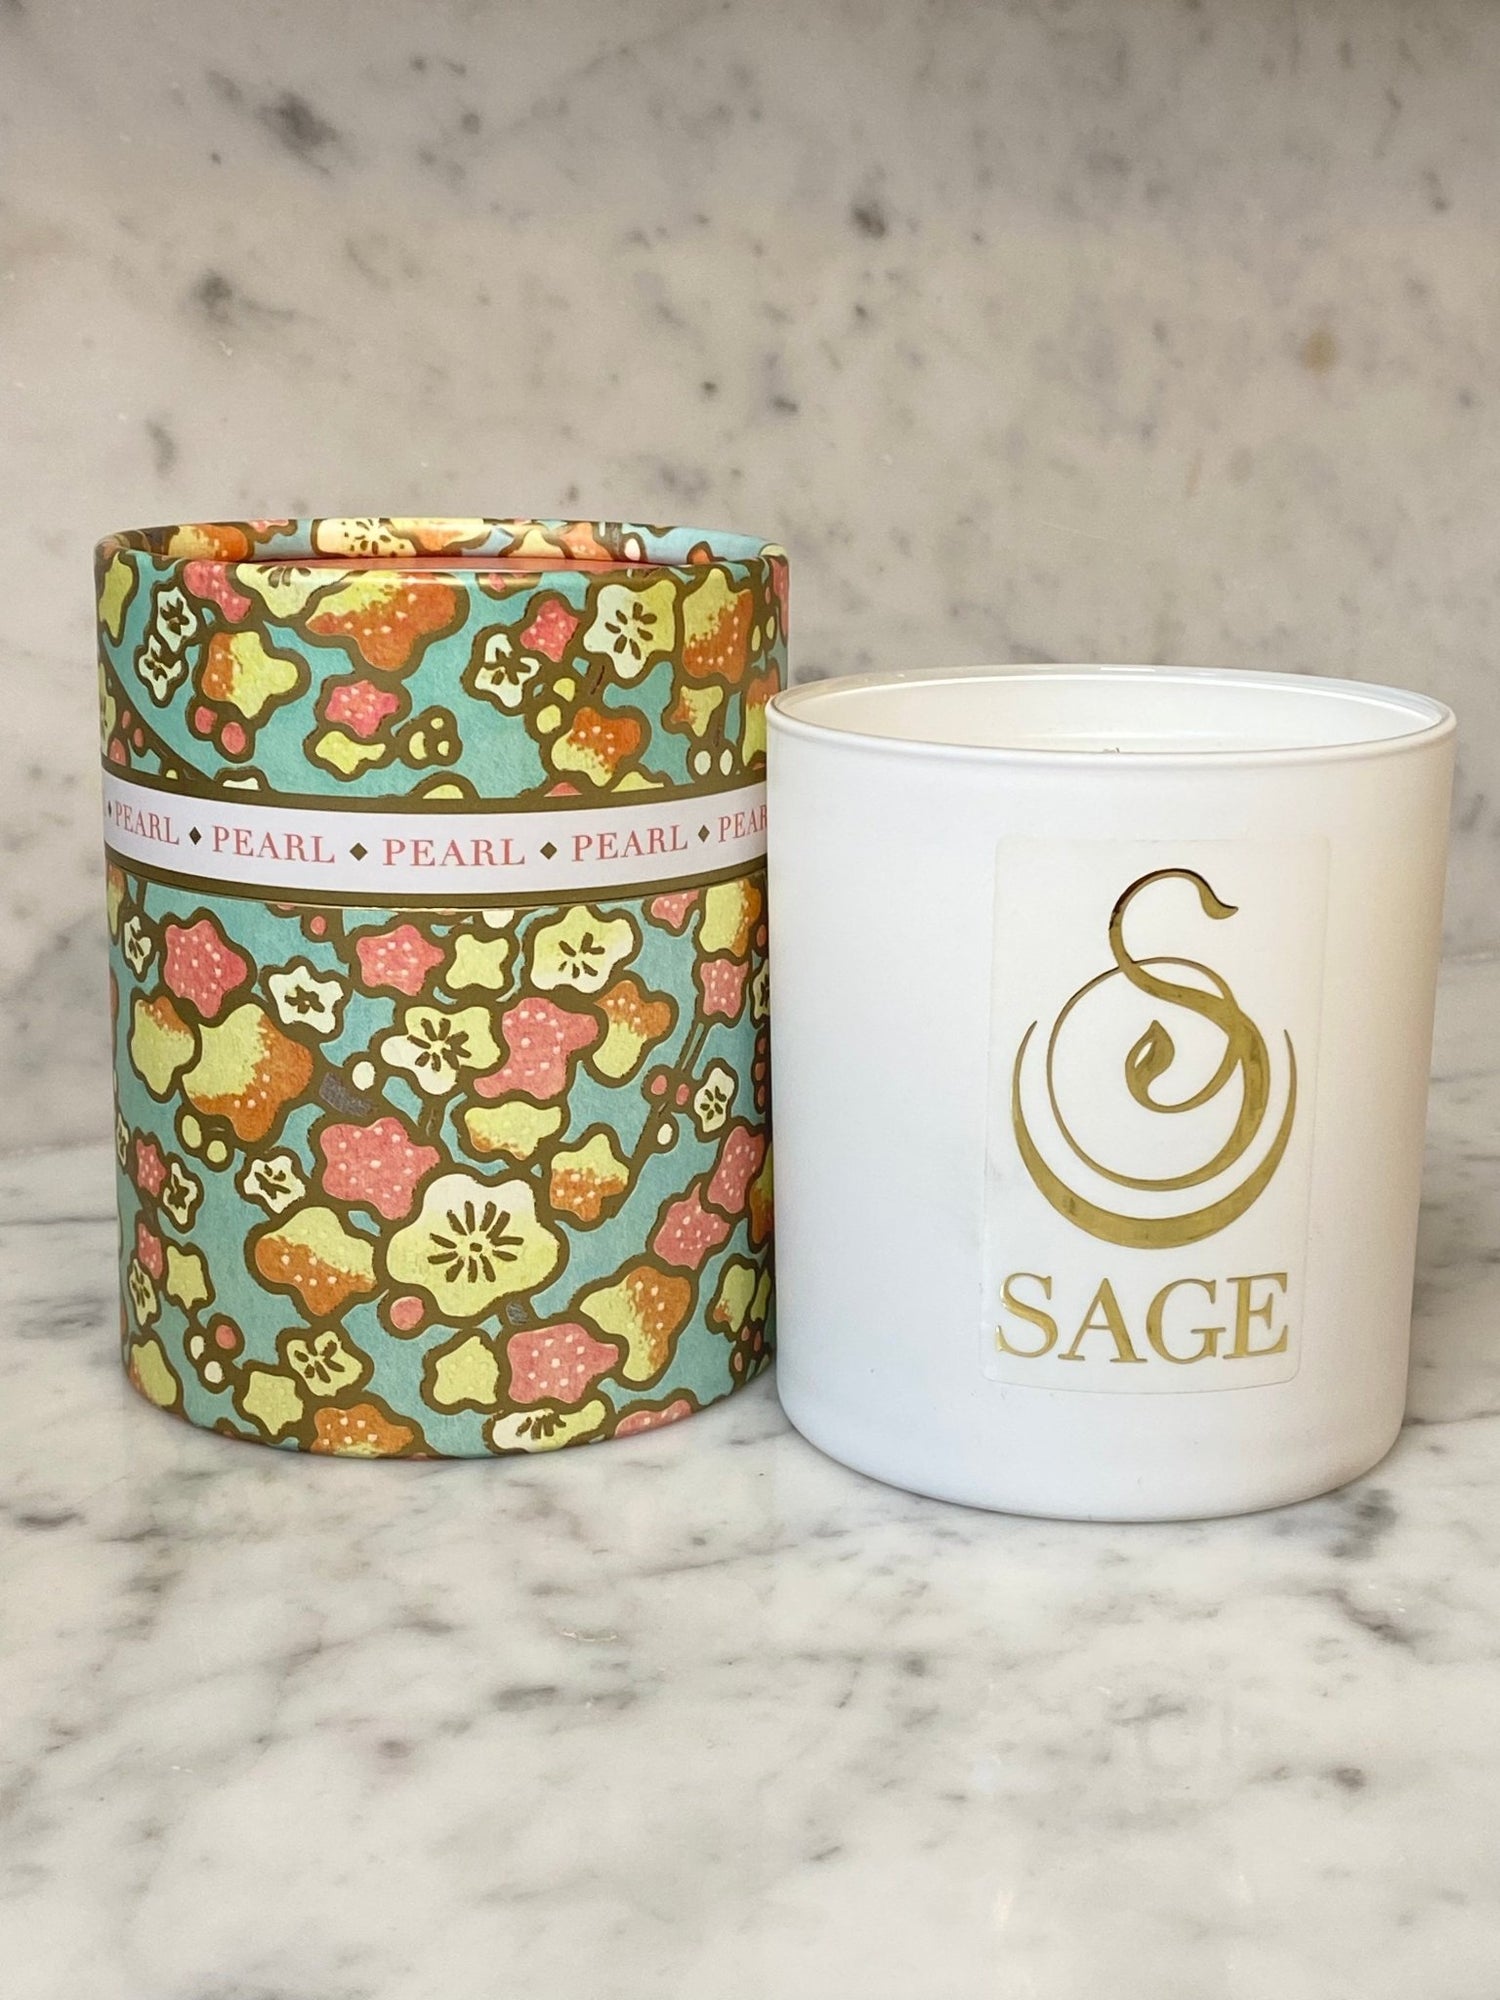 Top Seller Candle Trio Gift Set by Sage - The Sage Lifestyle